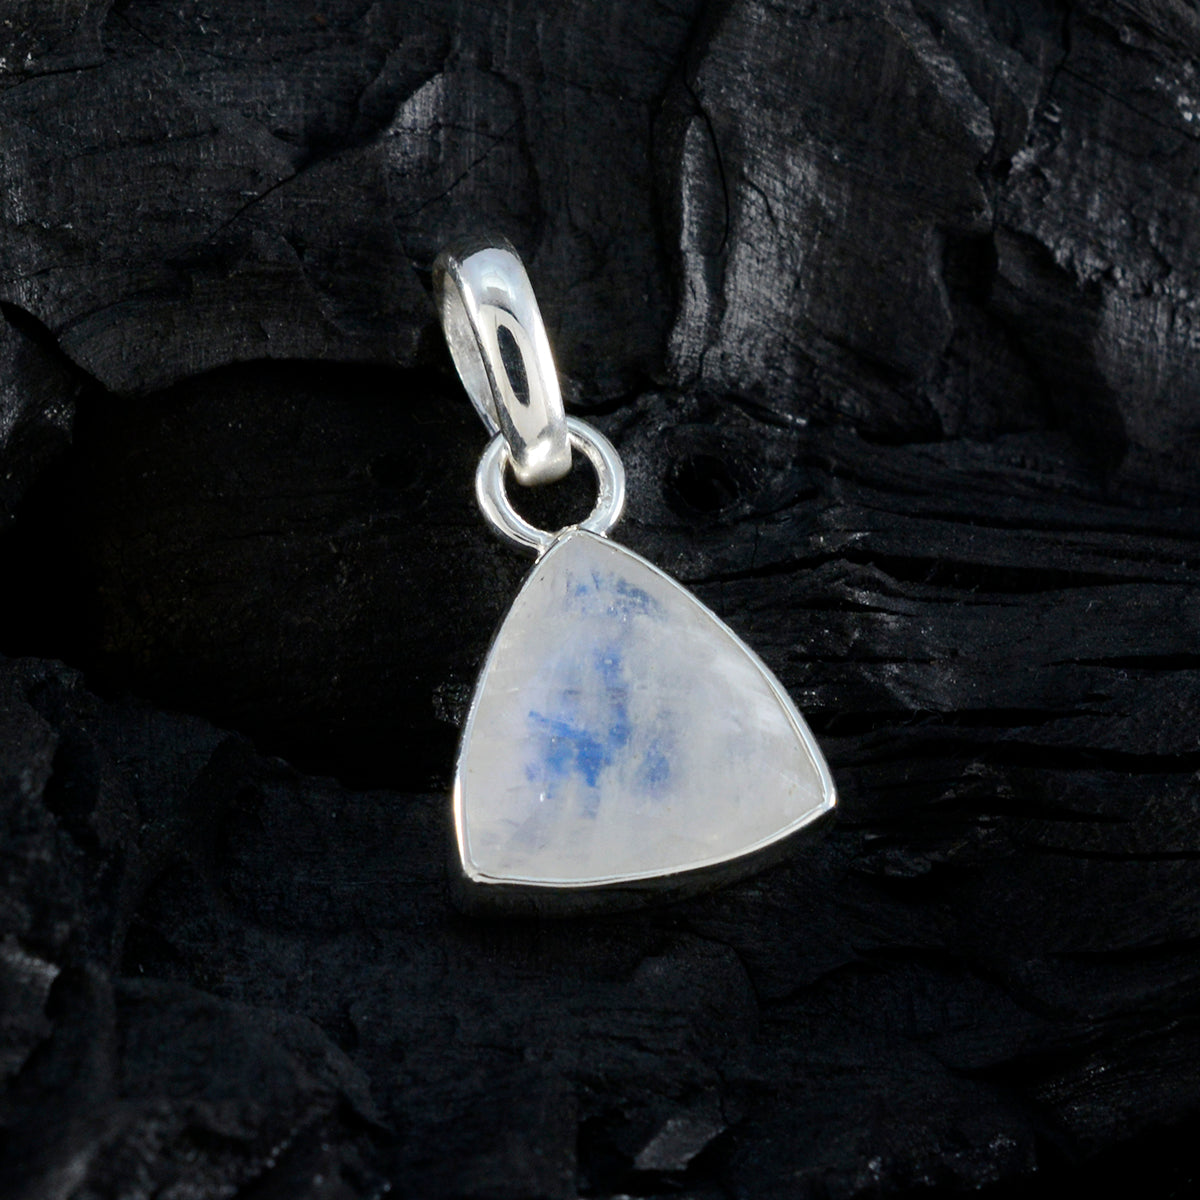 Riyo Bewitching Gems Trillion Faceted White Rainbow Moonstone Solid Silver Pendant Gift For Anniversary